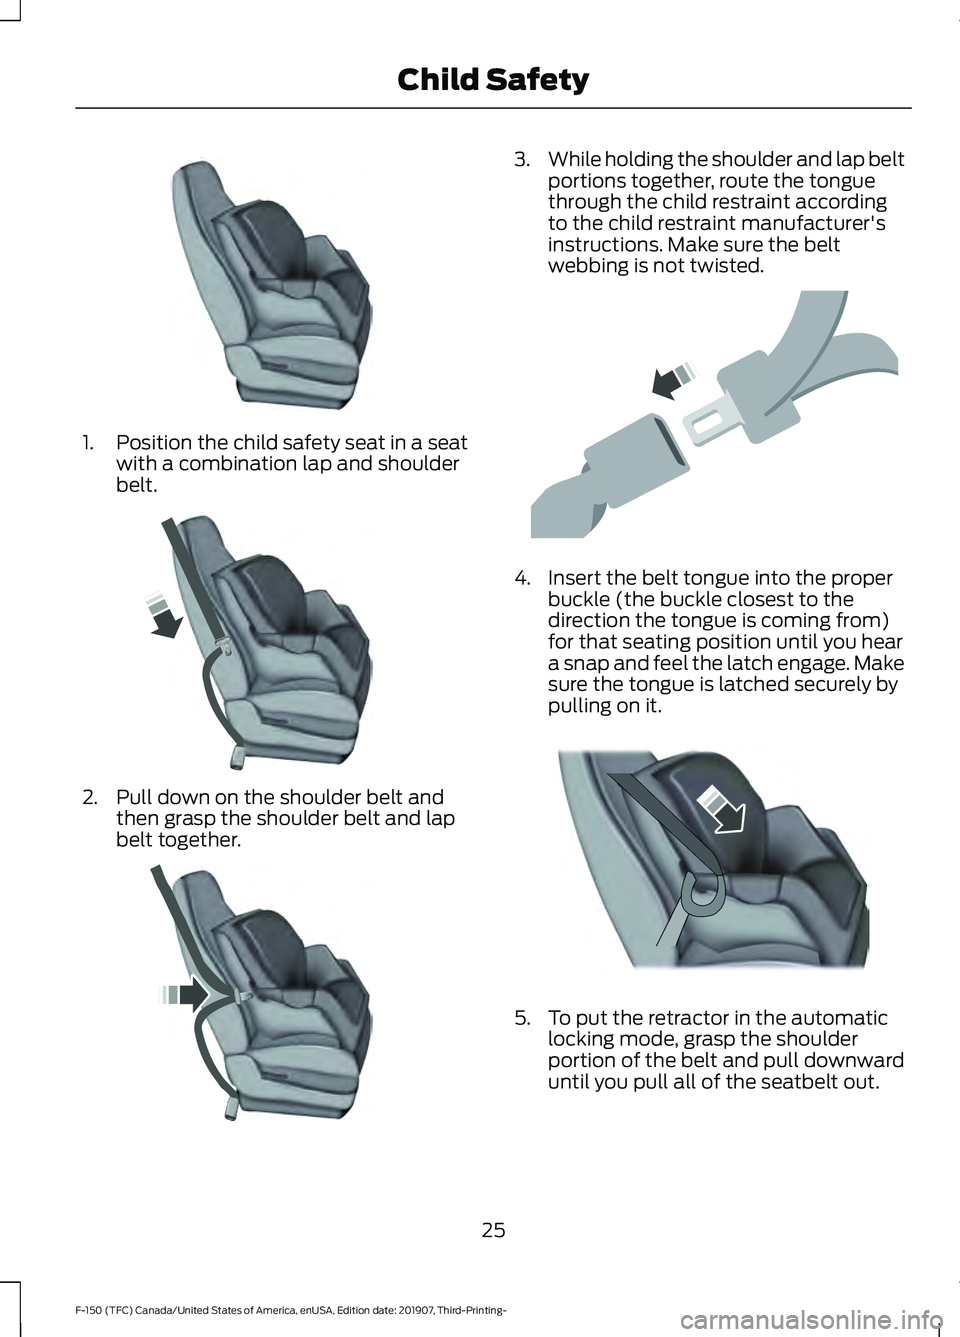 FORD F-150 2020  Owners Manual 1. Position the child safety seat in a seat
with a combination lap and shoulder
belt. 2. Pull down on the shoulder belt and
then grasp the shoulder belt and lap
belt together. 3.
While holding the sho